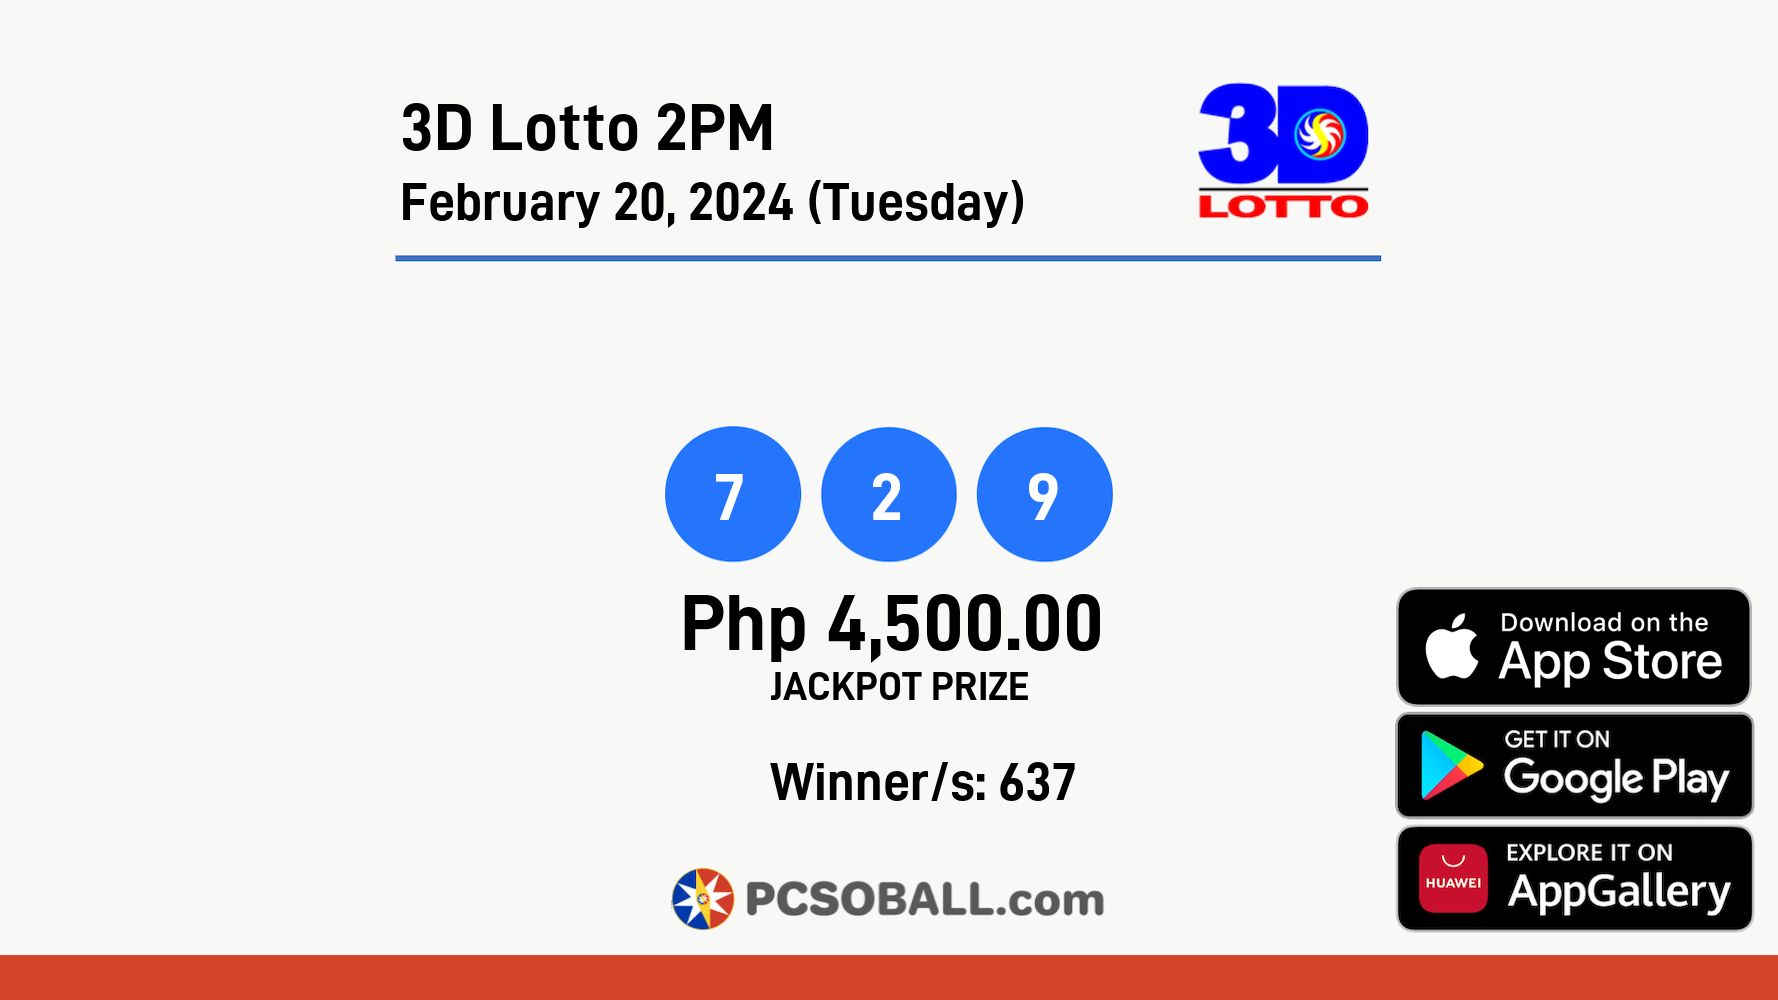 3D Lotto 2PM February 20, 2024 (Tuesday) Result